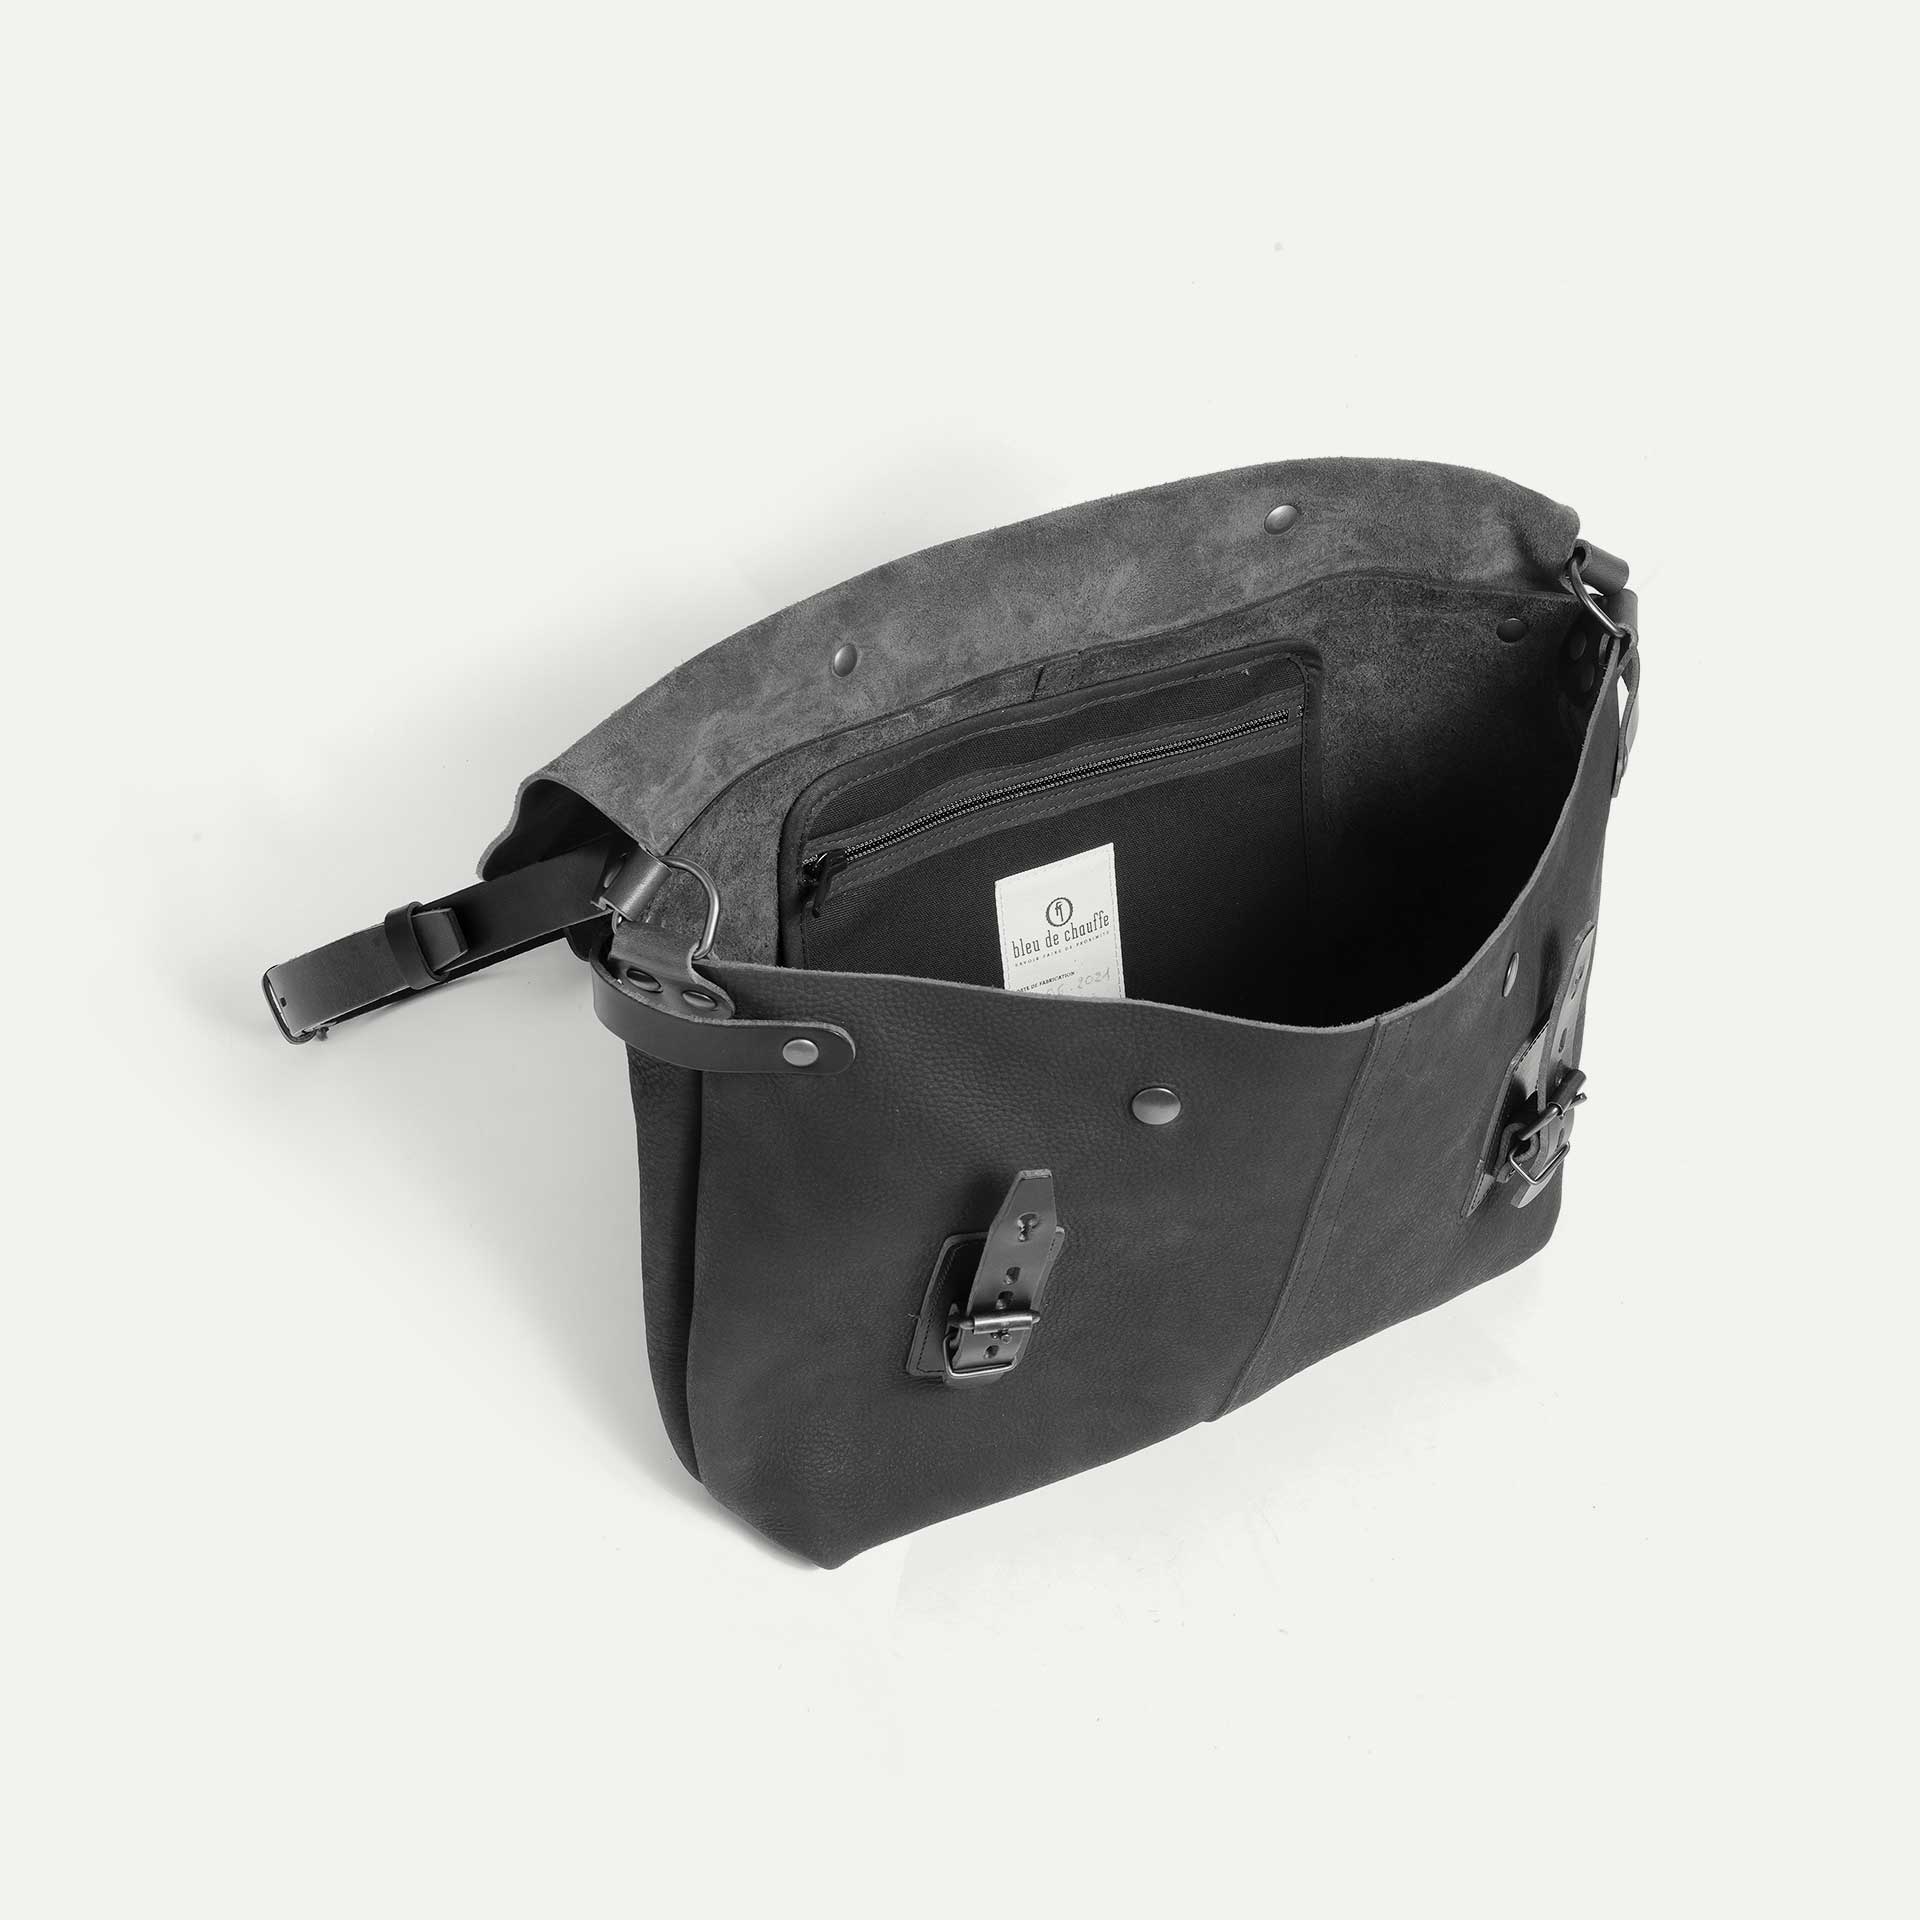 Lucien Satchel bag - Charcoal Black / Waxed Leather (image n°4)